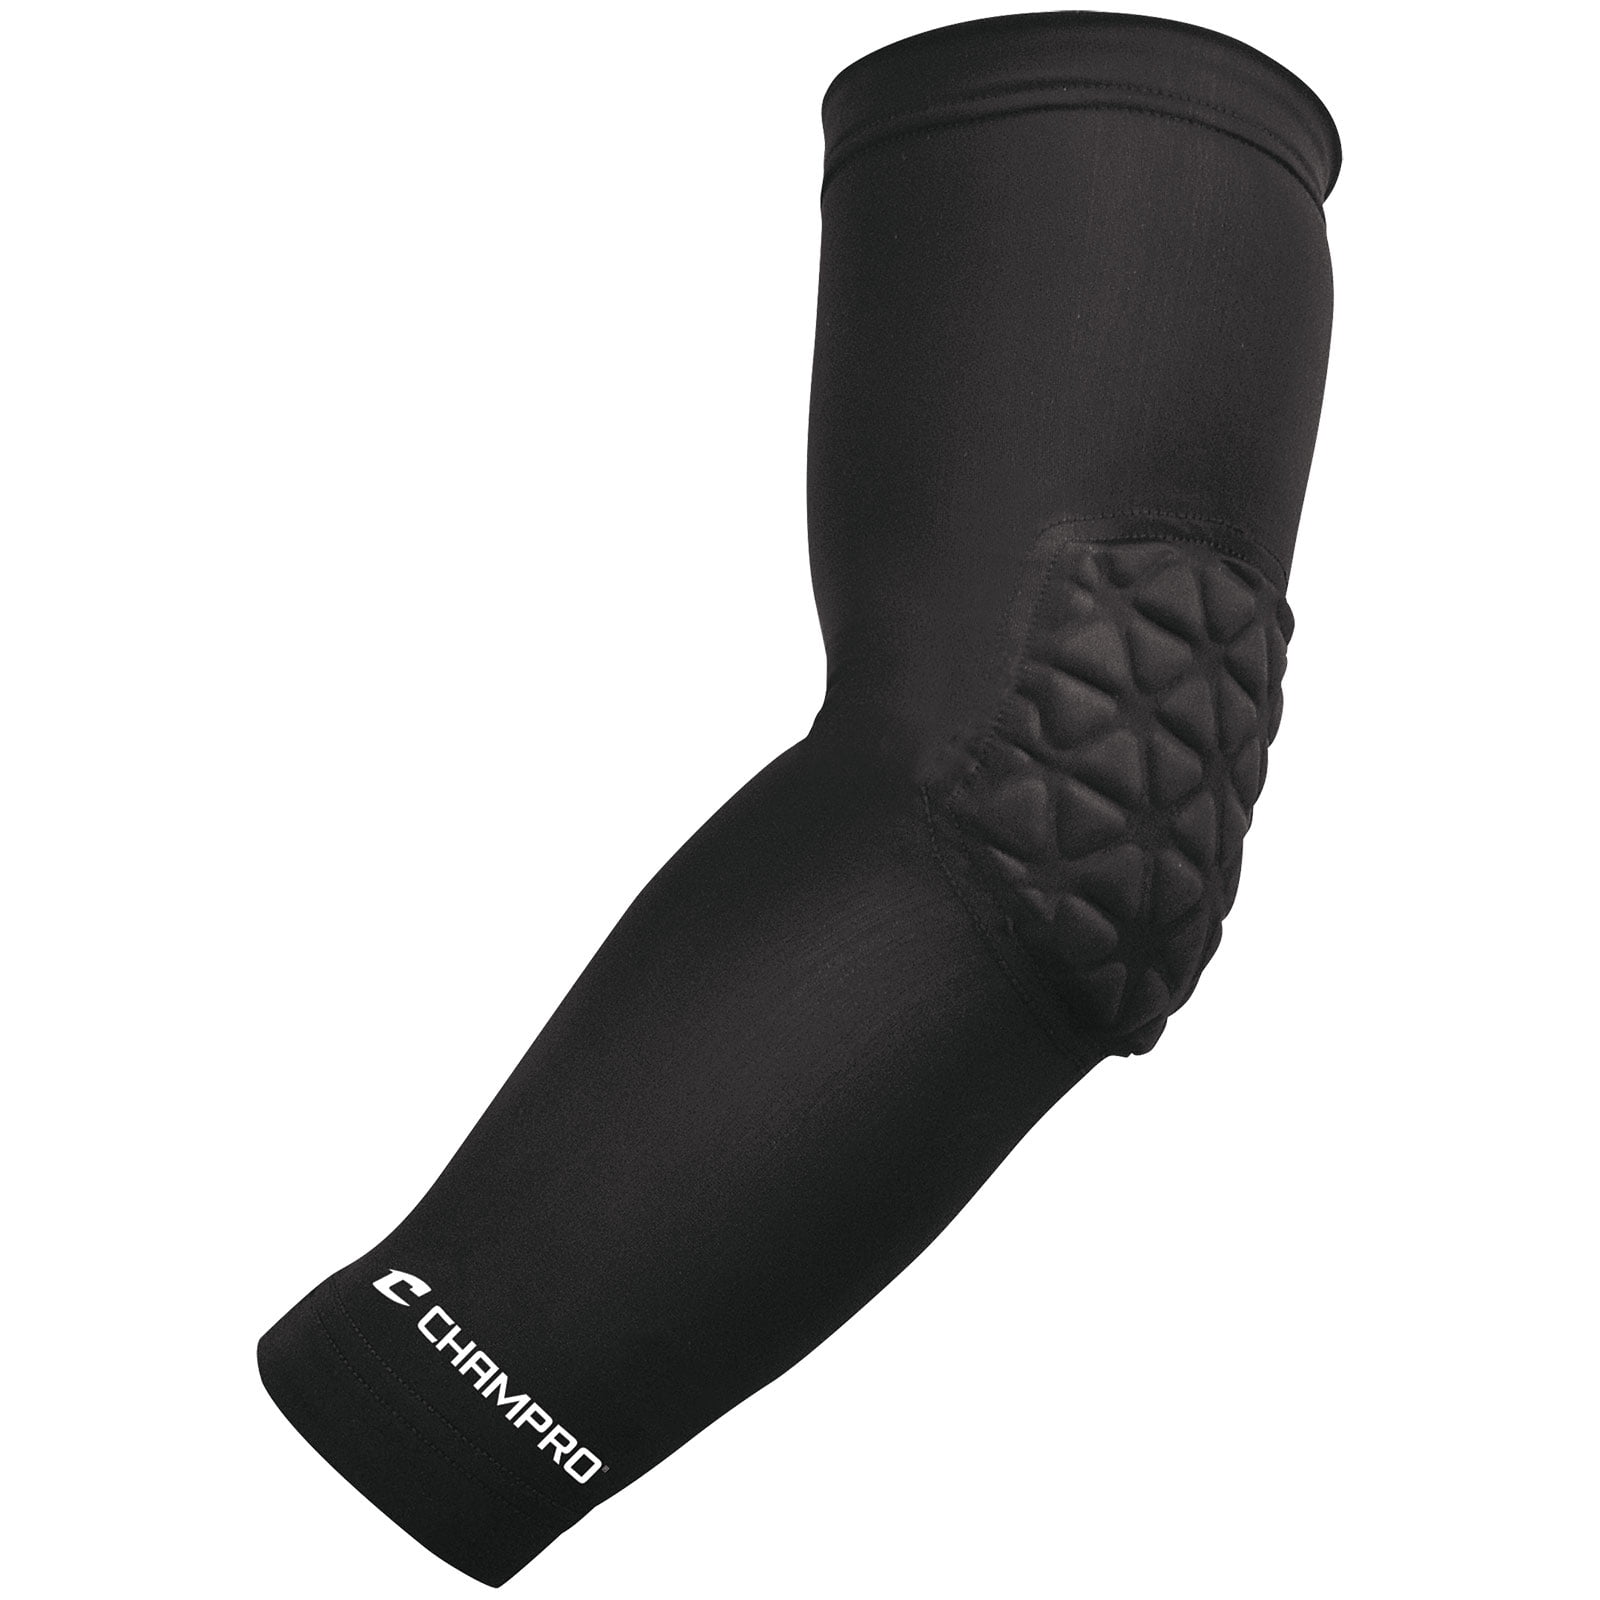 CHAMPRO Compression Arm Sleeve with Elbow Padding, Small, Black 